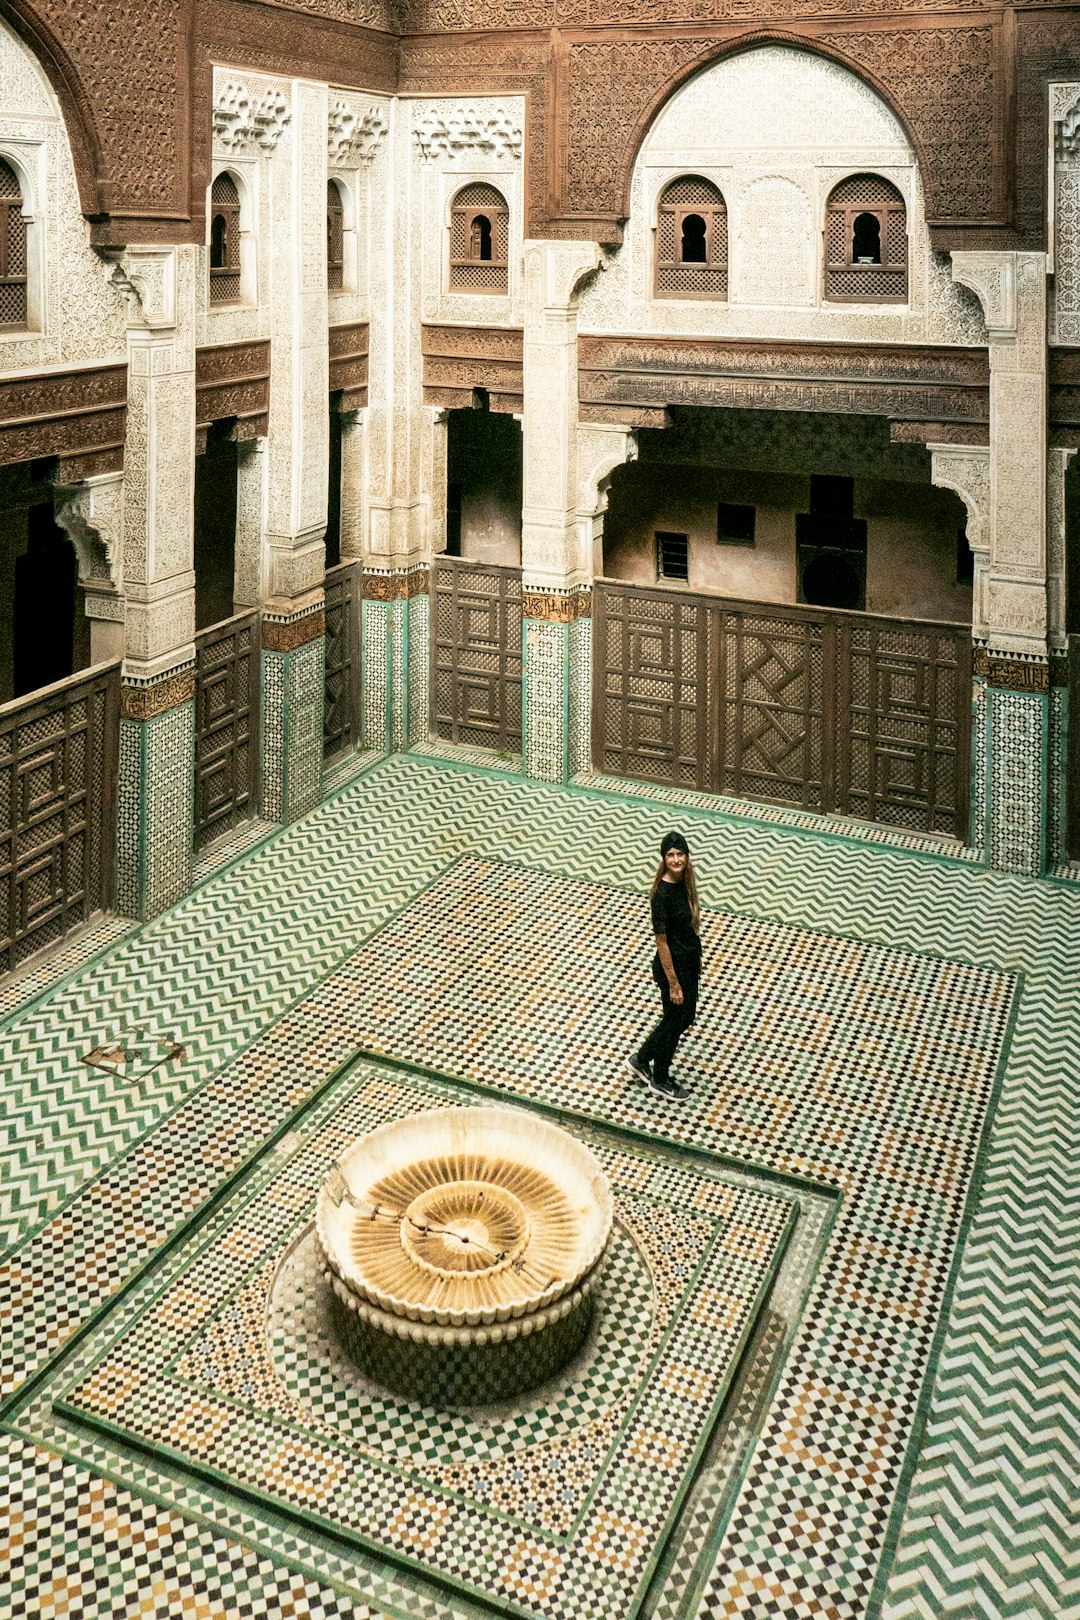 marble floor acnh, marble floor, a person standing in a room with a fountain